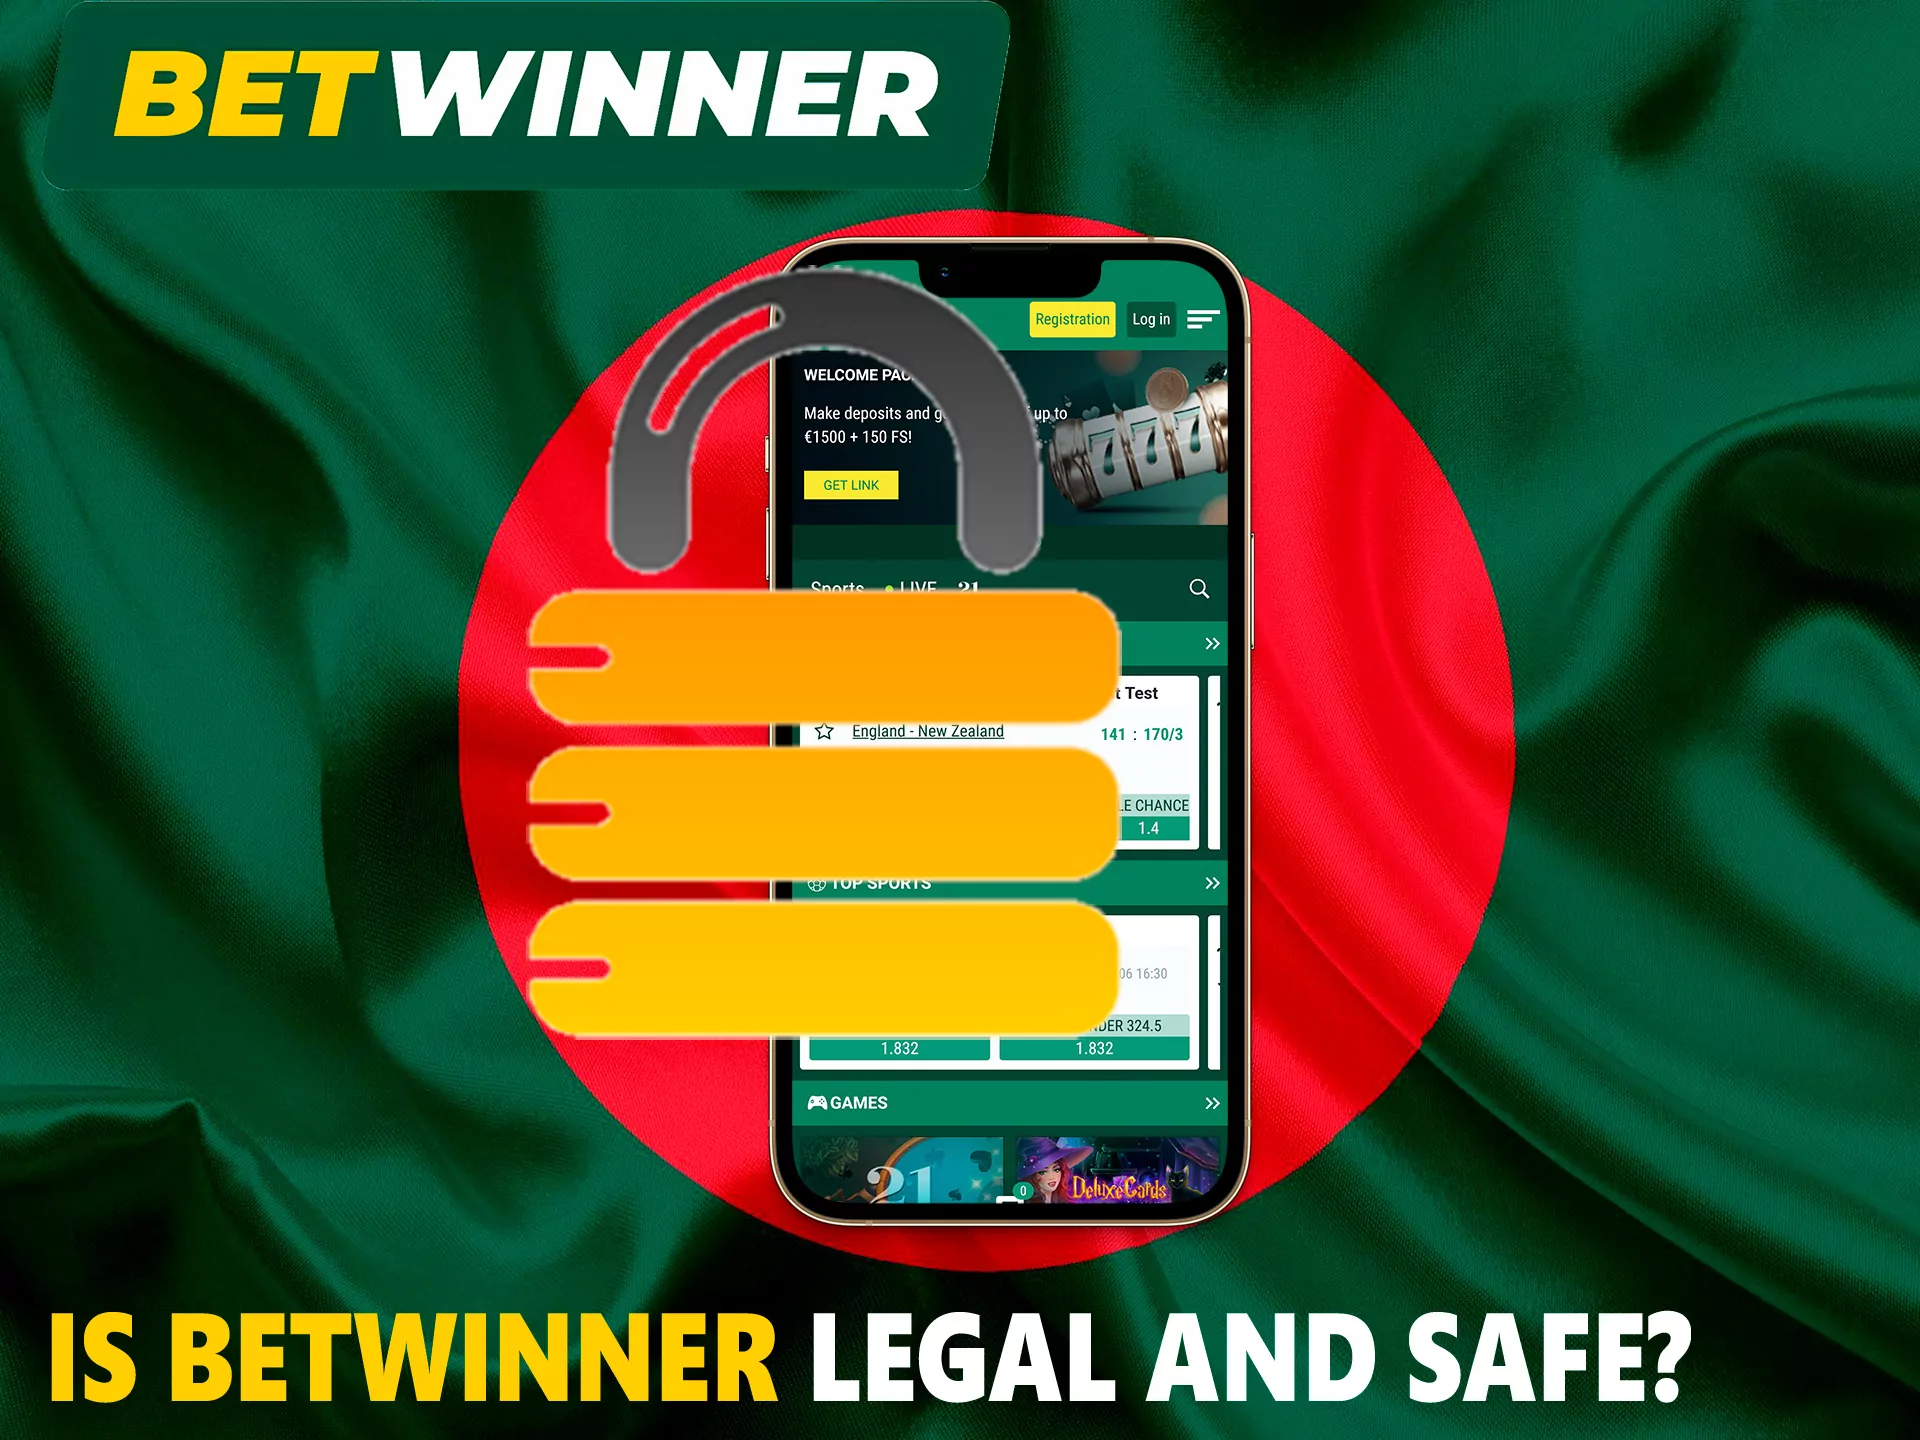 Betwinner offers only secure payment methods and is legal in Bangladesh.